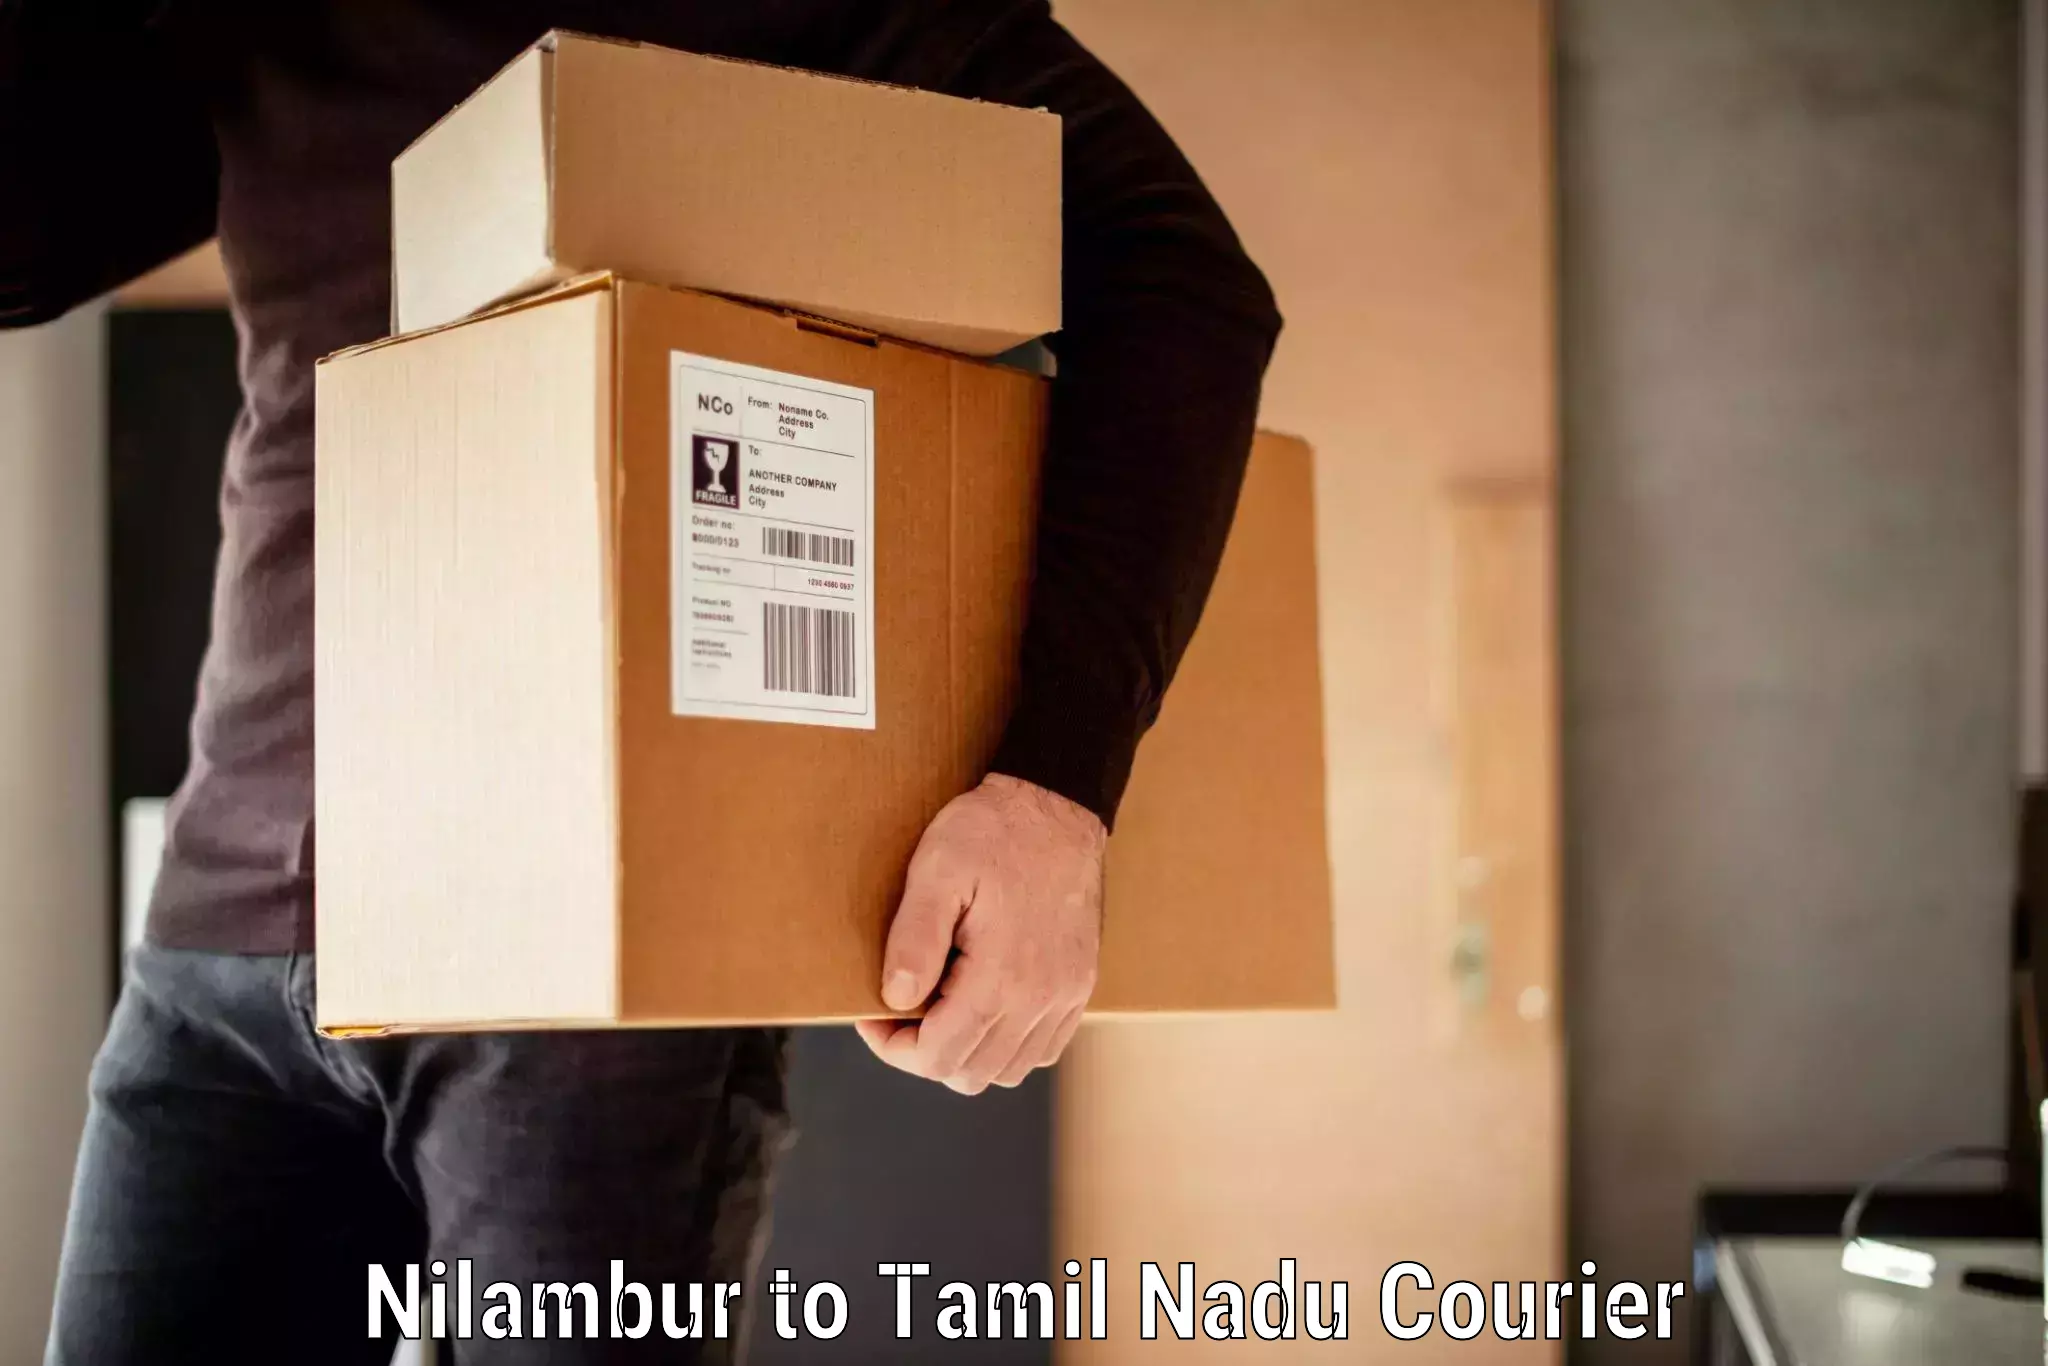 Baggage relocation service Nilambur to Vellore Institute of Technology